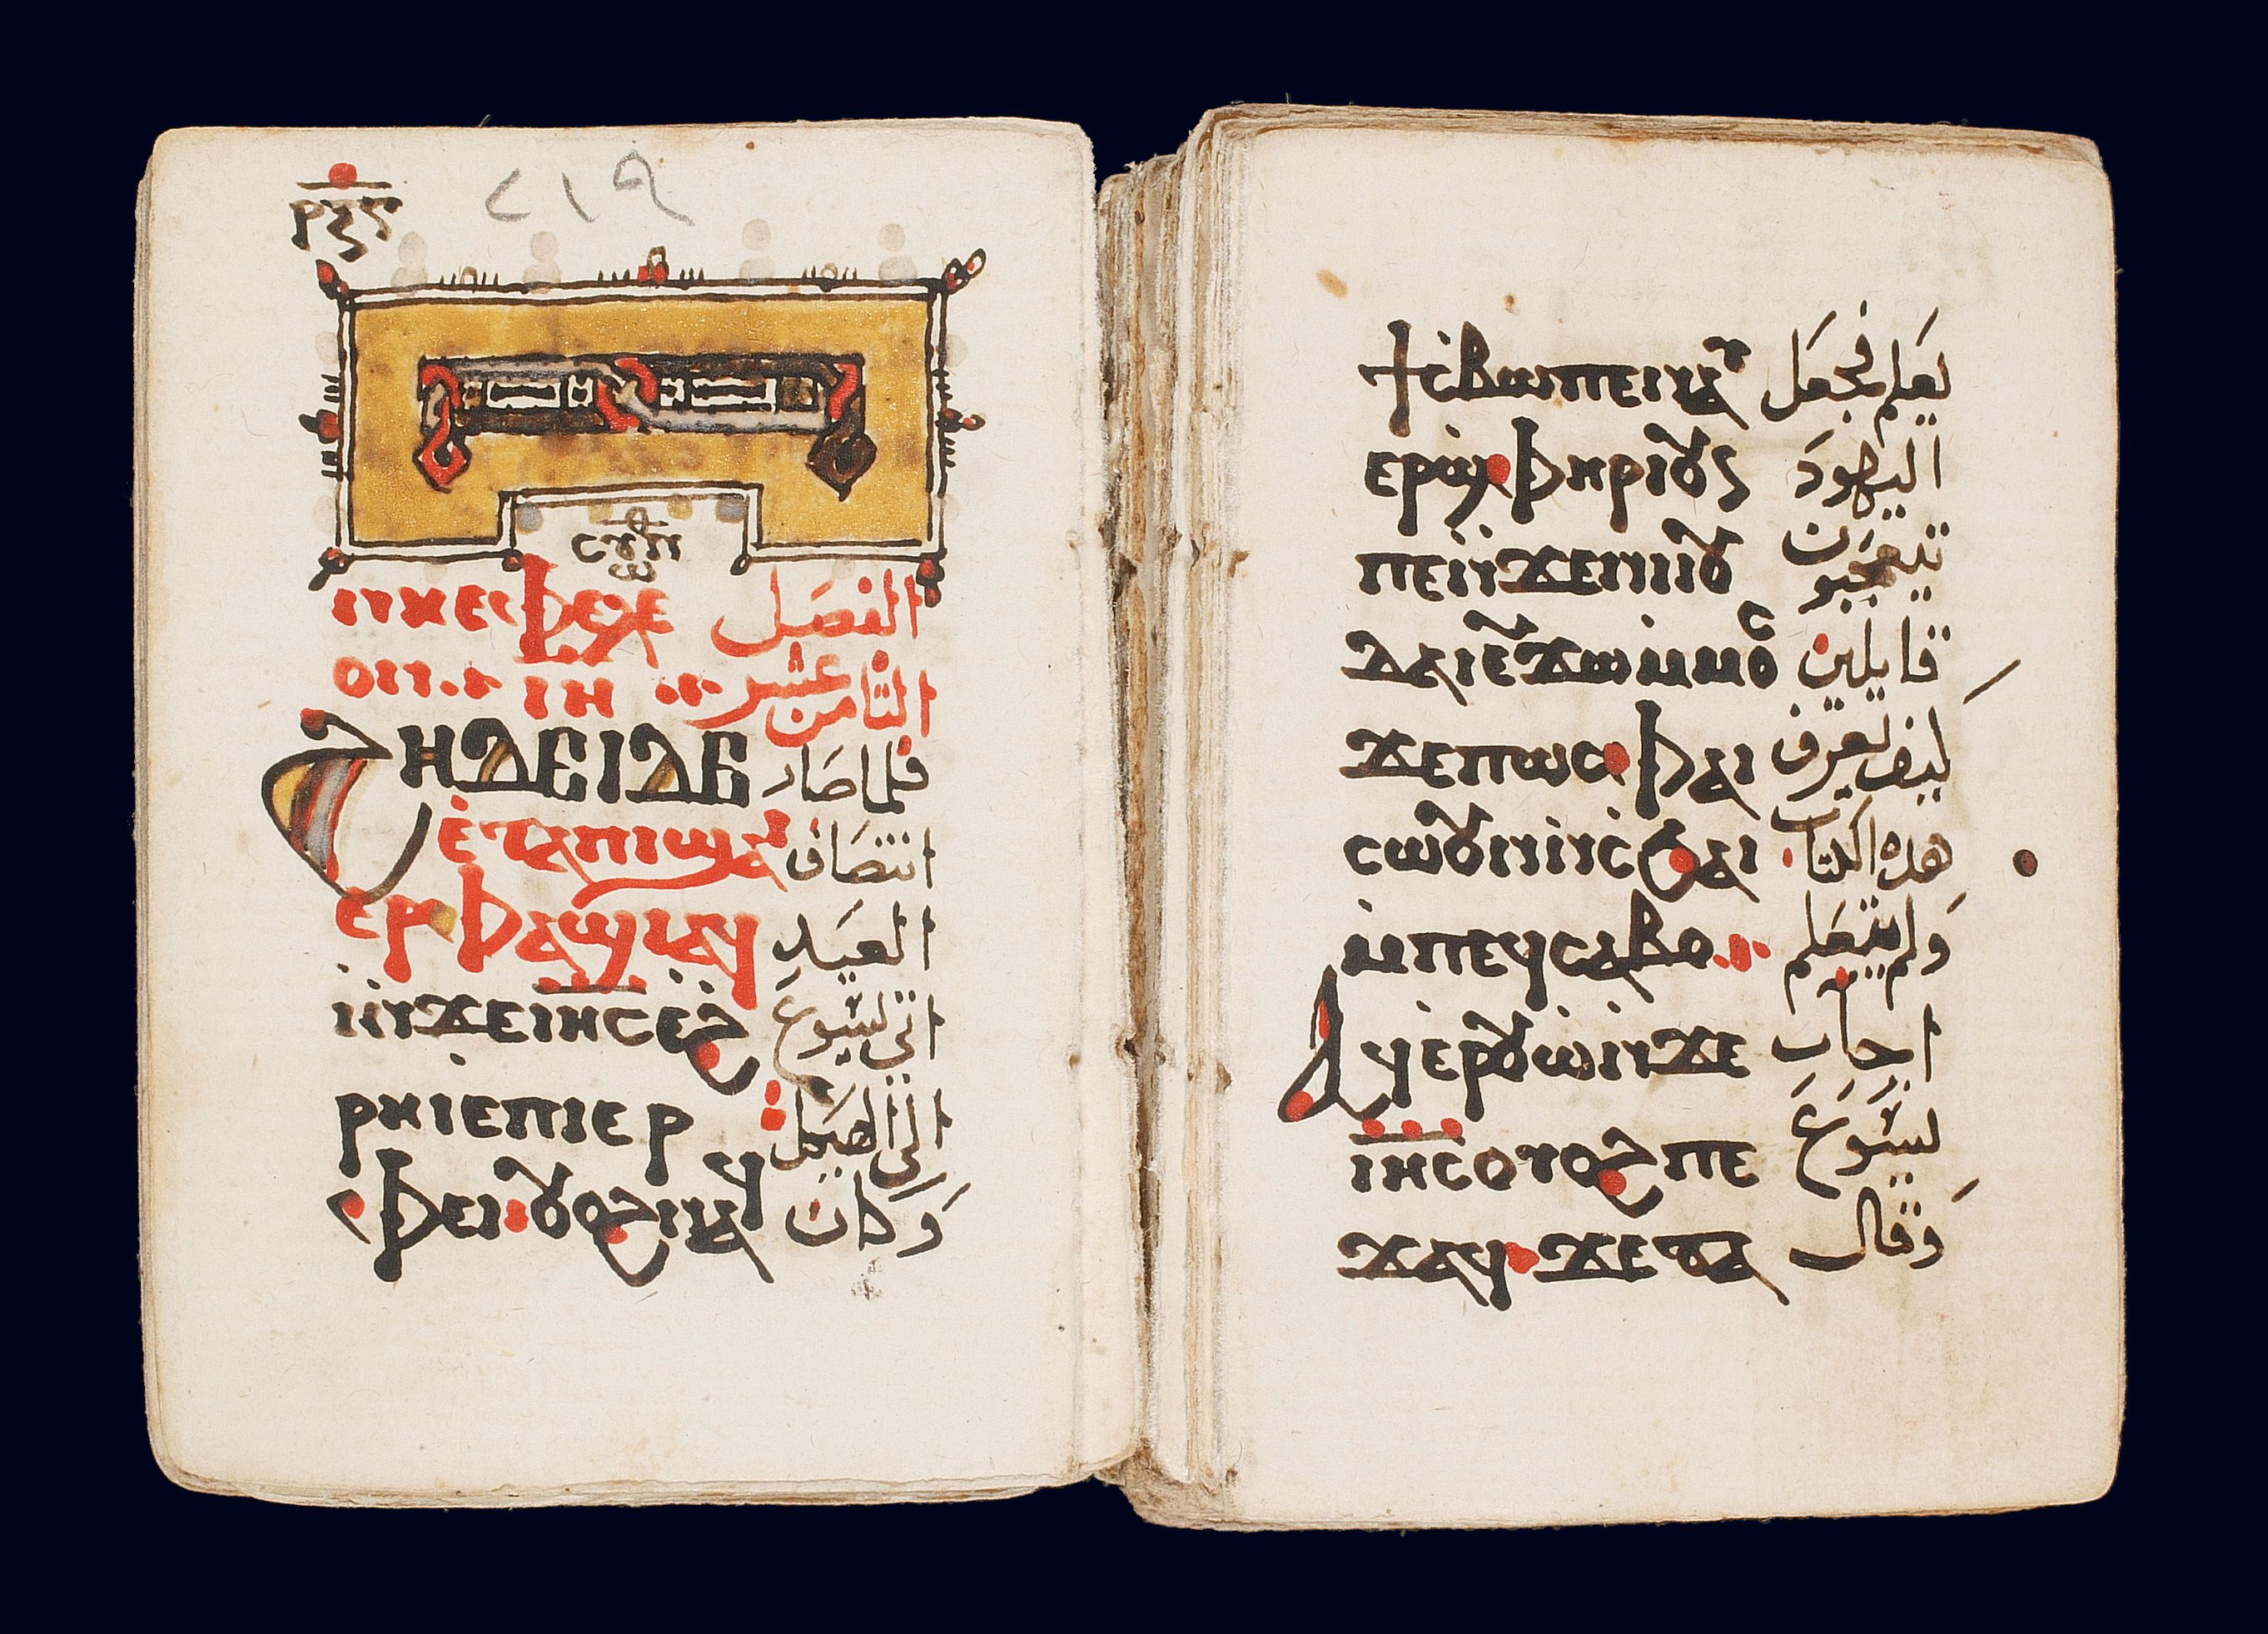 Tiny 17th-c. gospel book in Coptic and Arabic from the Fondation Georges et Mathilde Salem, Aleppo (<a href='https://w3id.org/vhmml/readingRoom/view/501590'>GAMS 1035</a>)